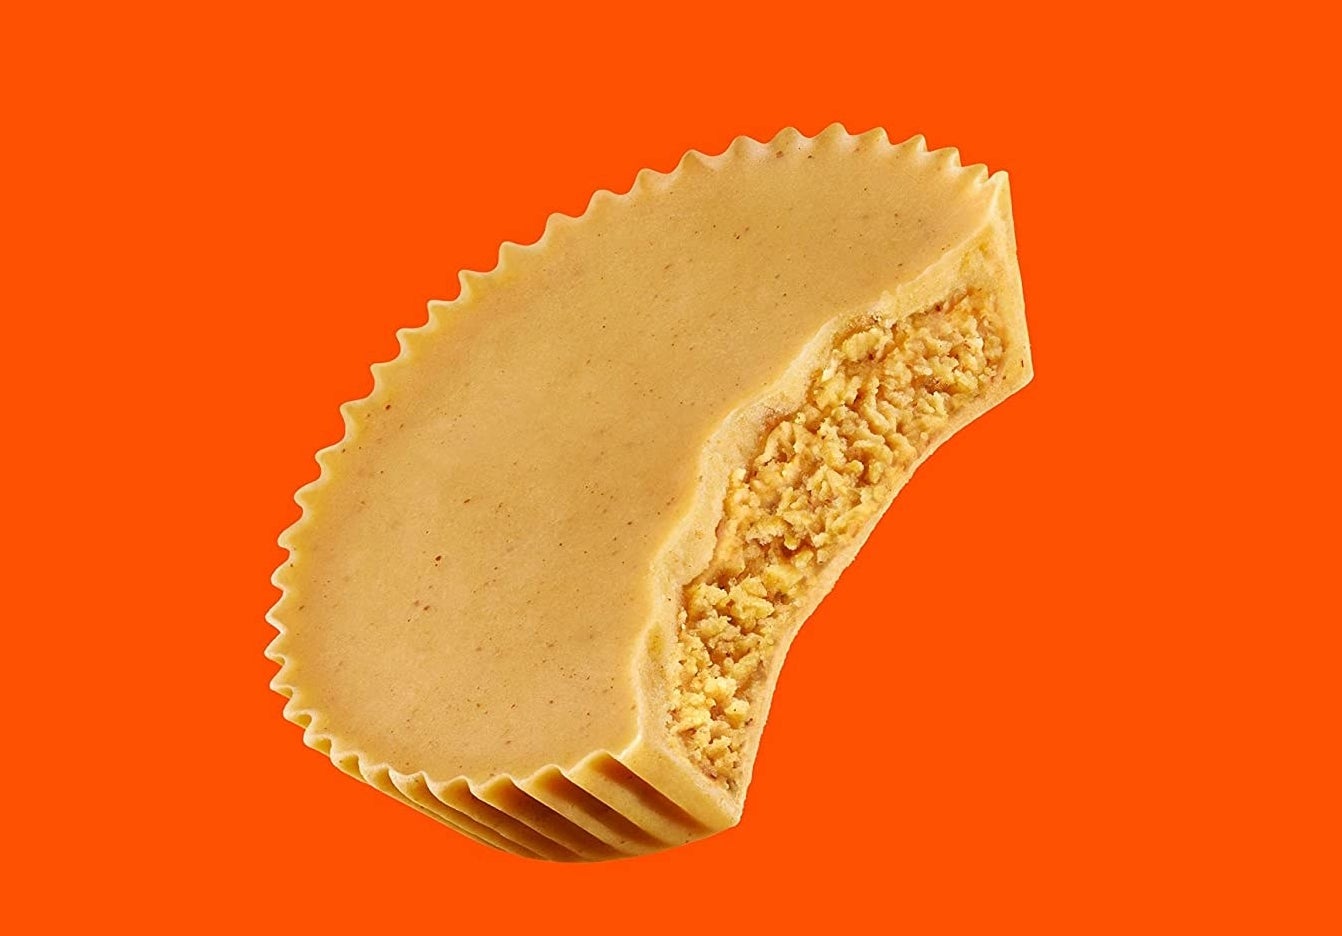 The peanut butter cup